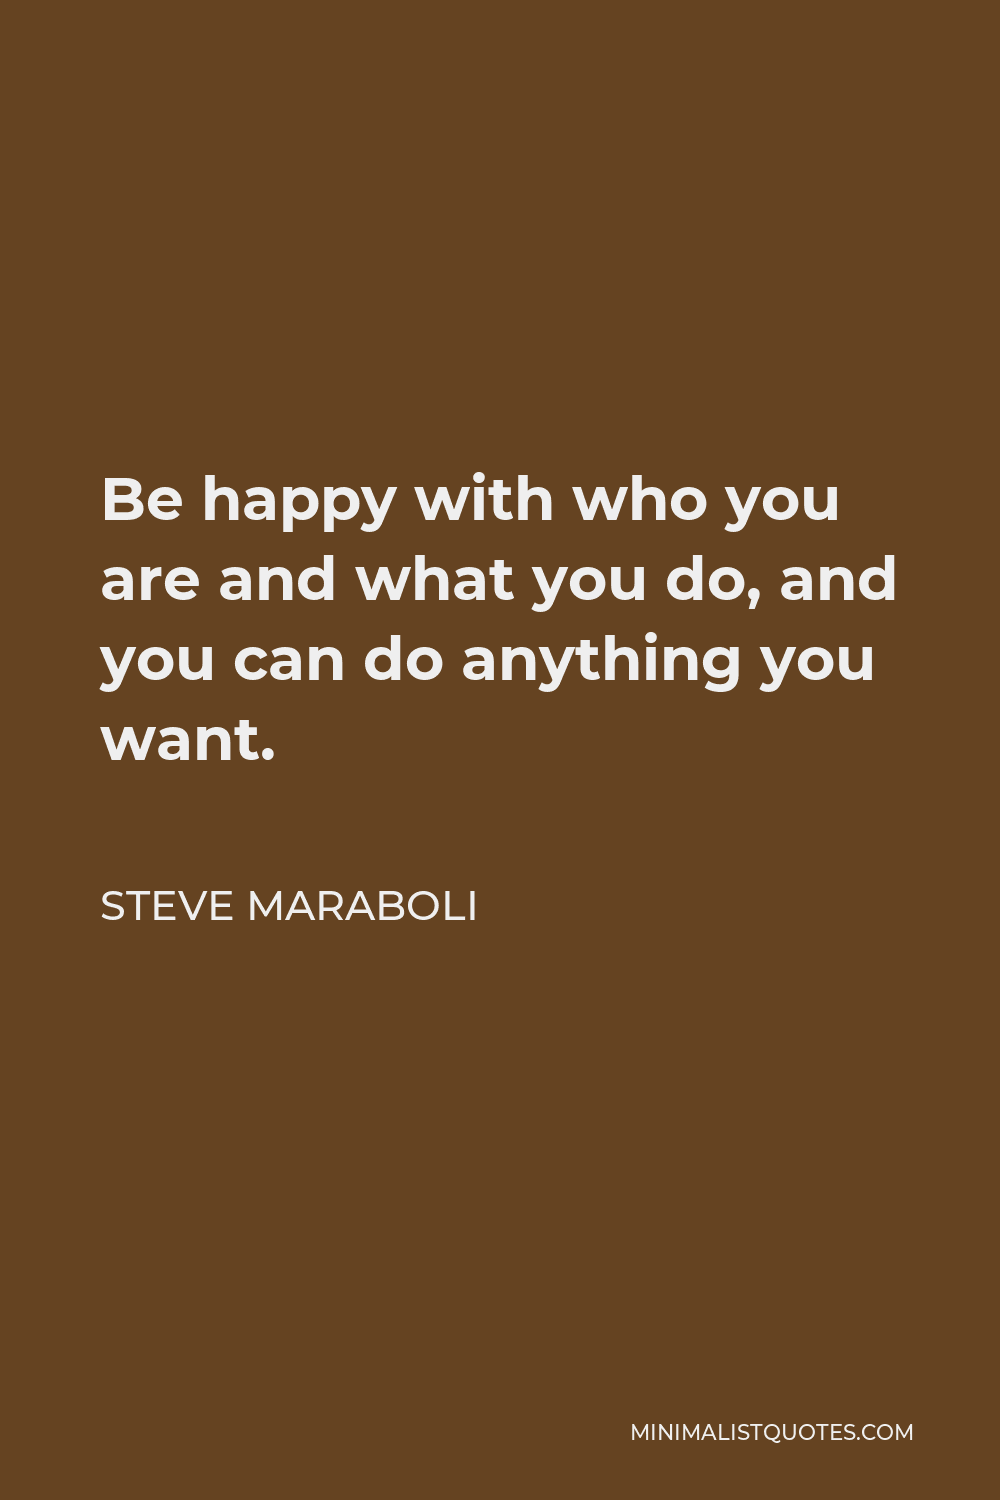 Steve Maraboli Quote - Be happy with who you are and what you do, and you can do anything you want.